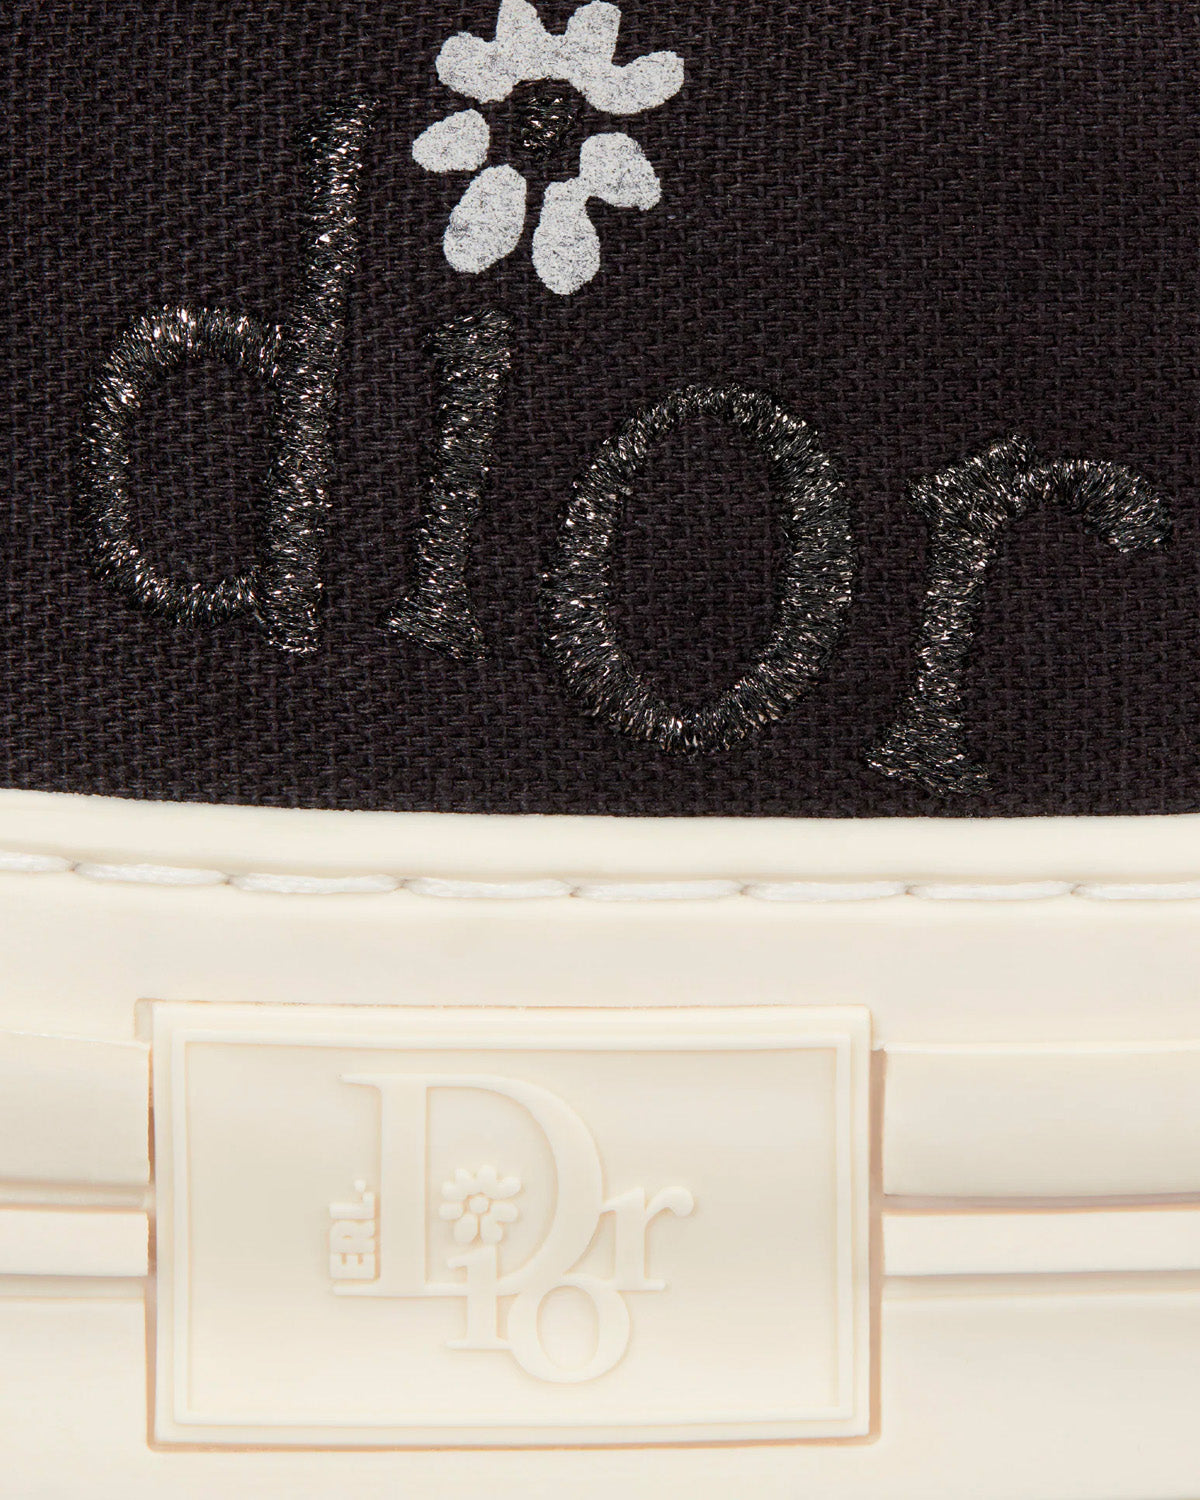 Dior x ERL - B23 Skater Black Cotton Canvas Low Top Sneakers